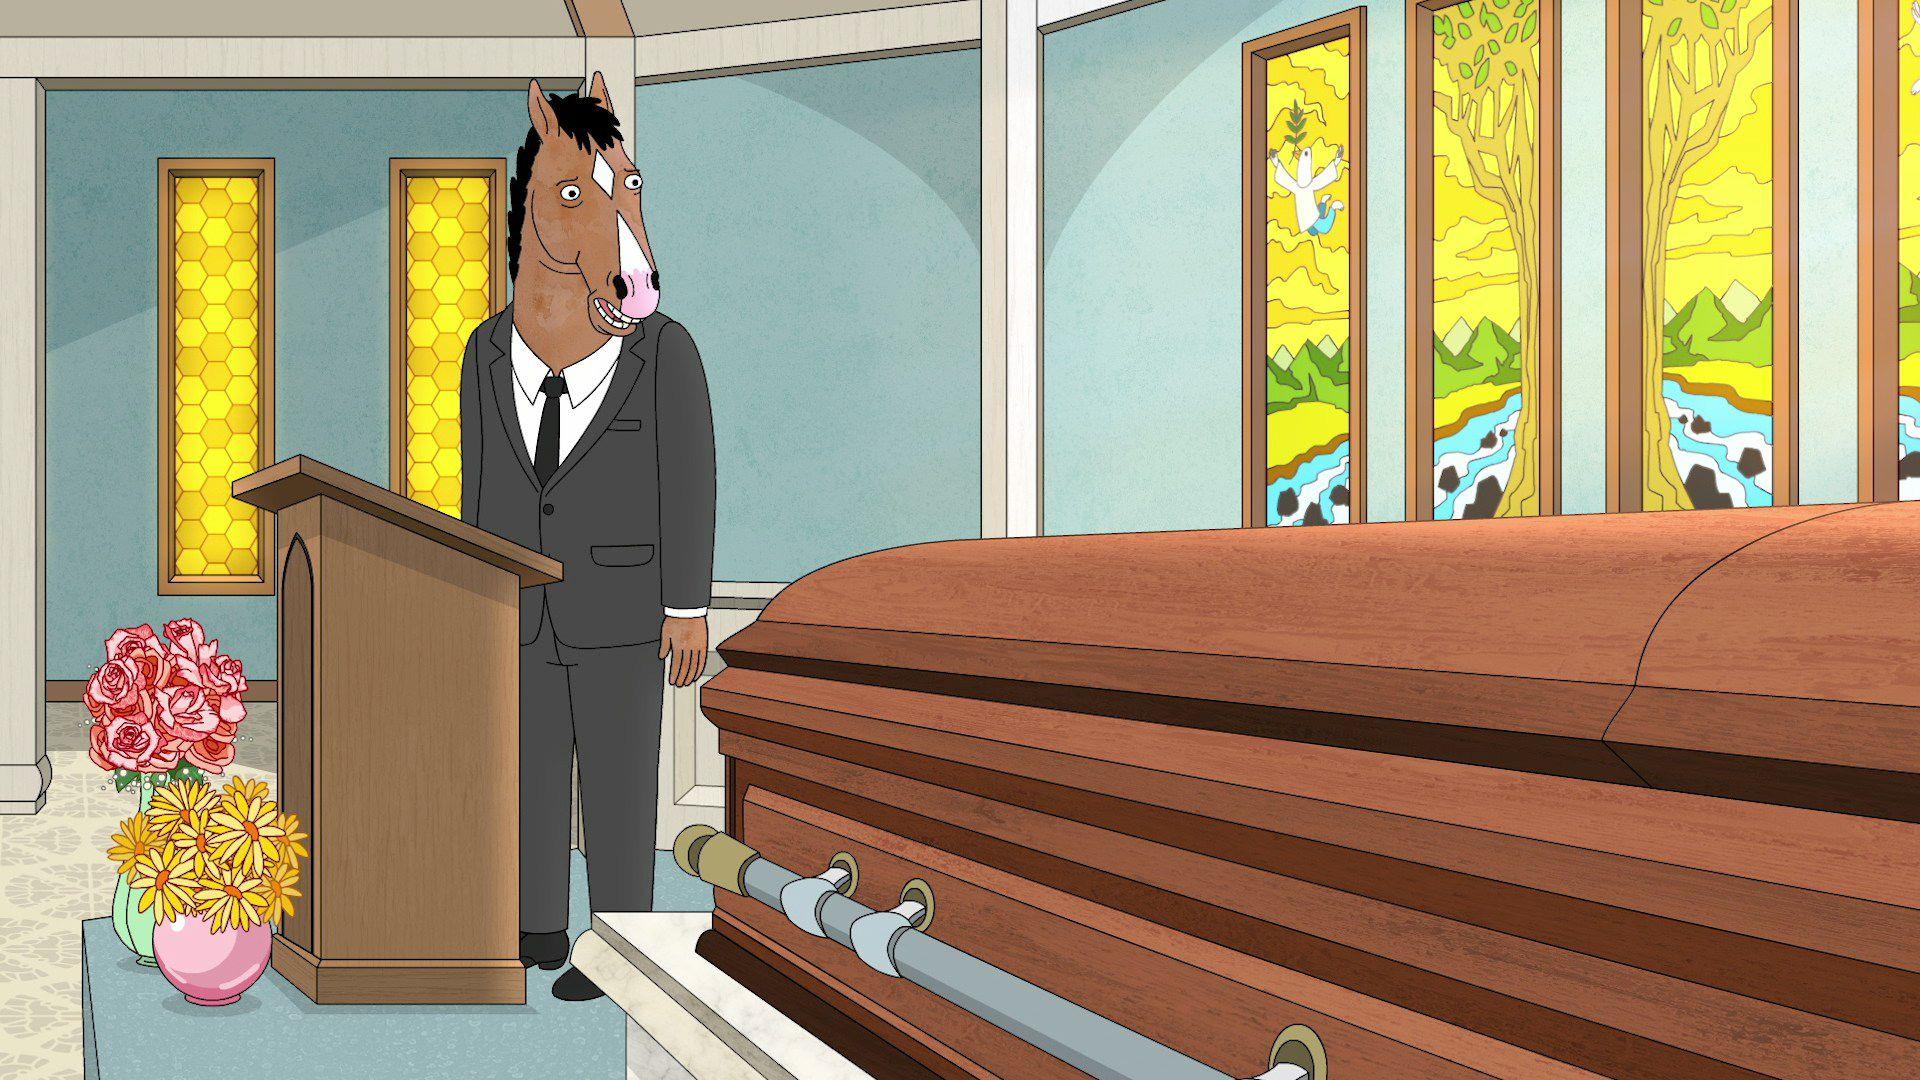 This 'BoJack Horseman' episode is unlike any other the show